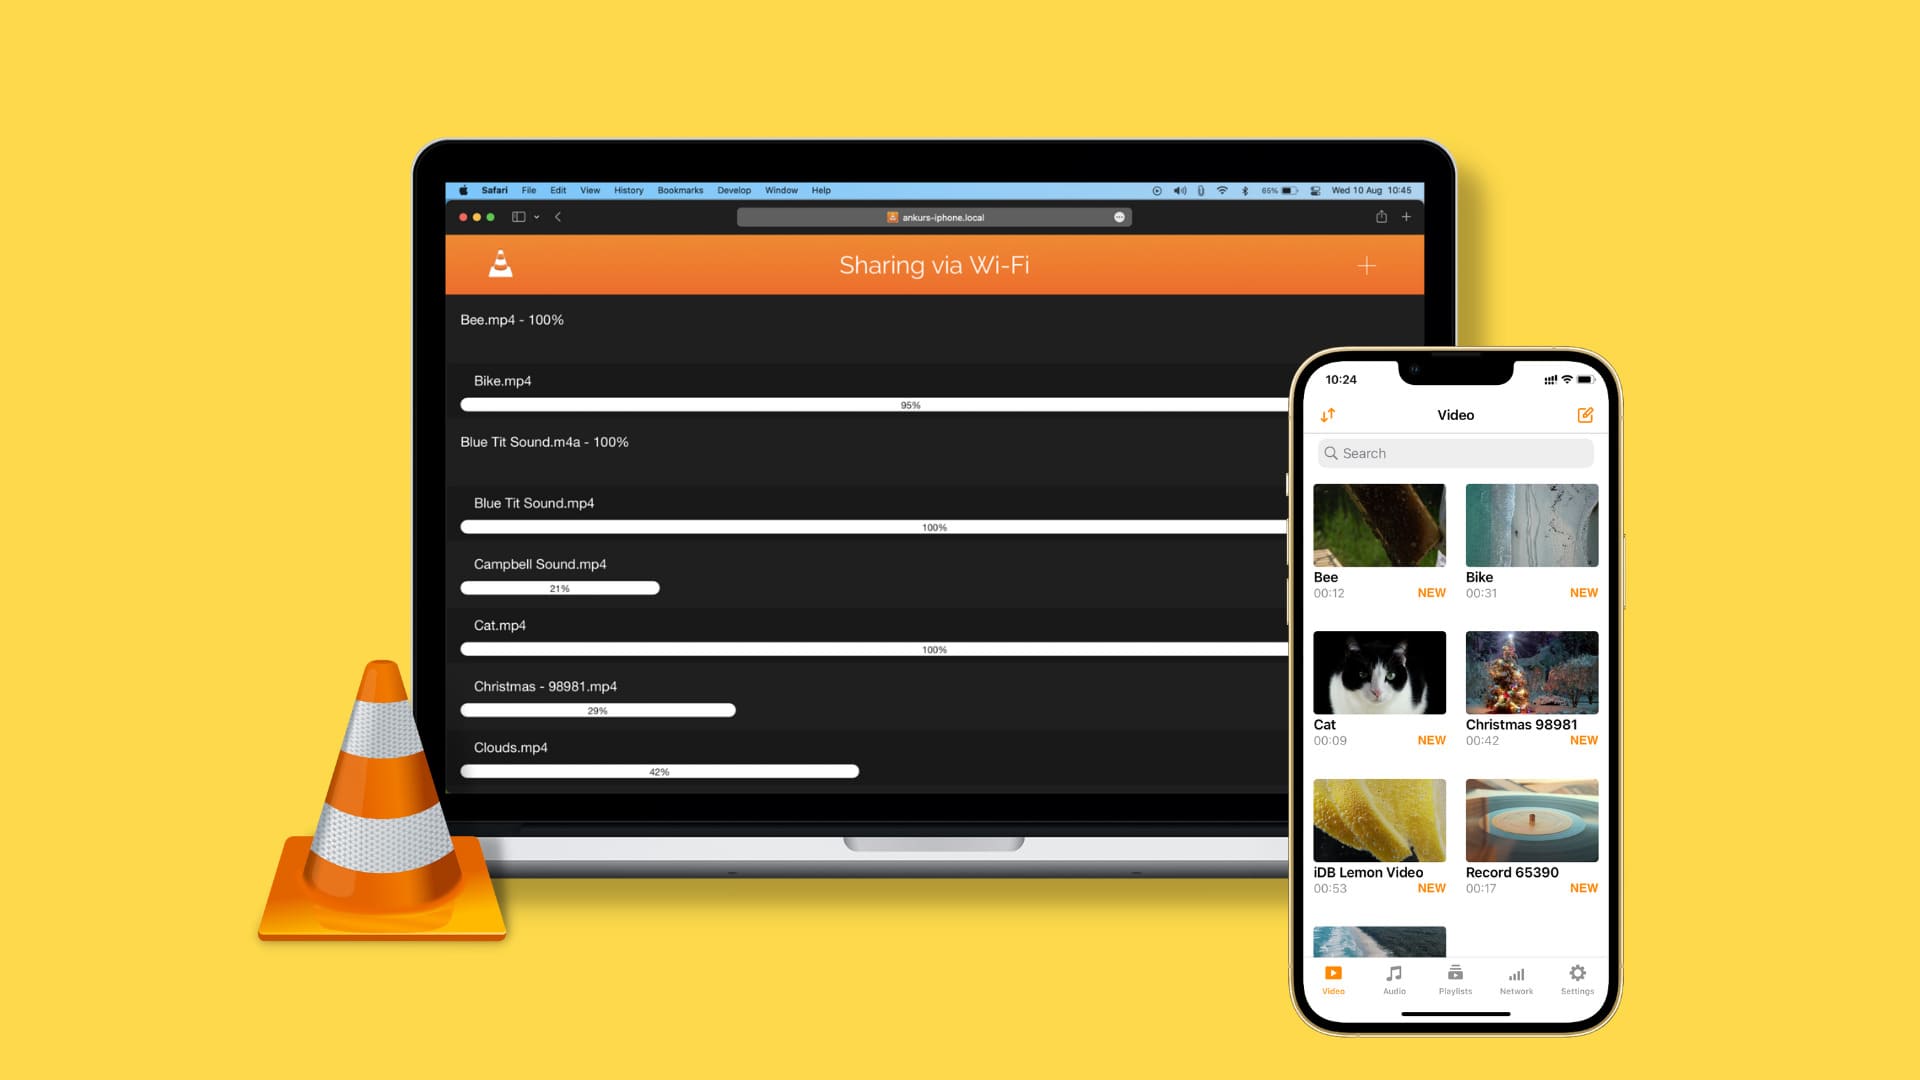 Transfer file to the VLC iPhone or iPad app from your Mac or PC